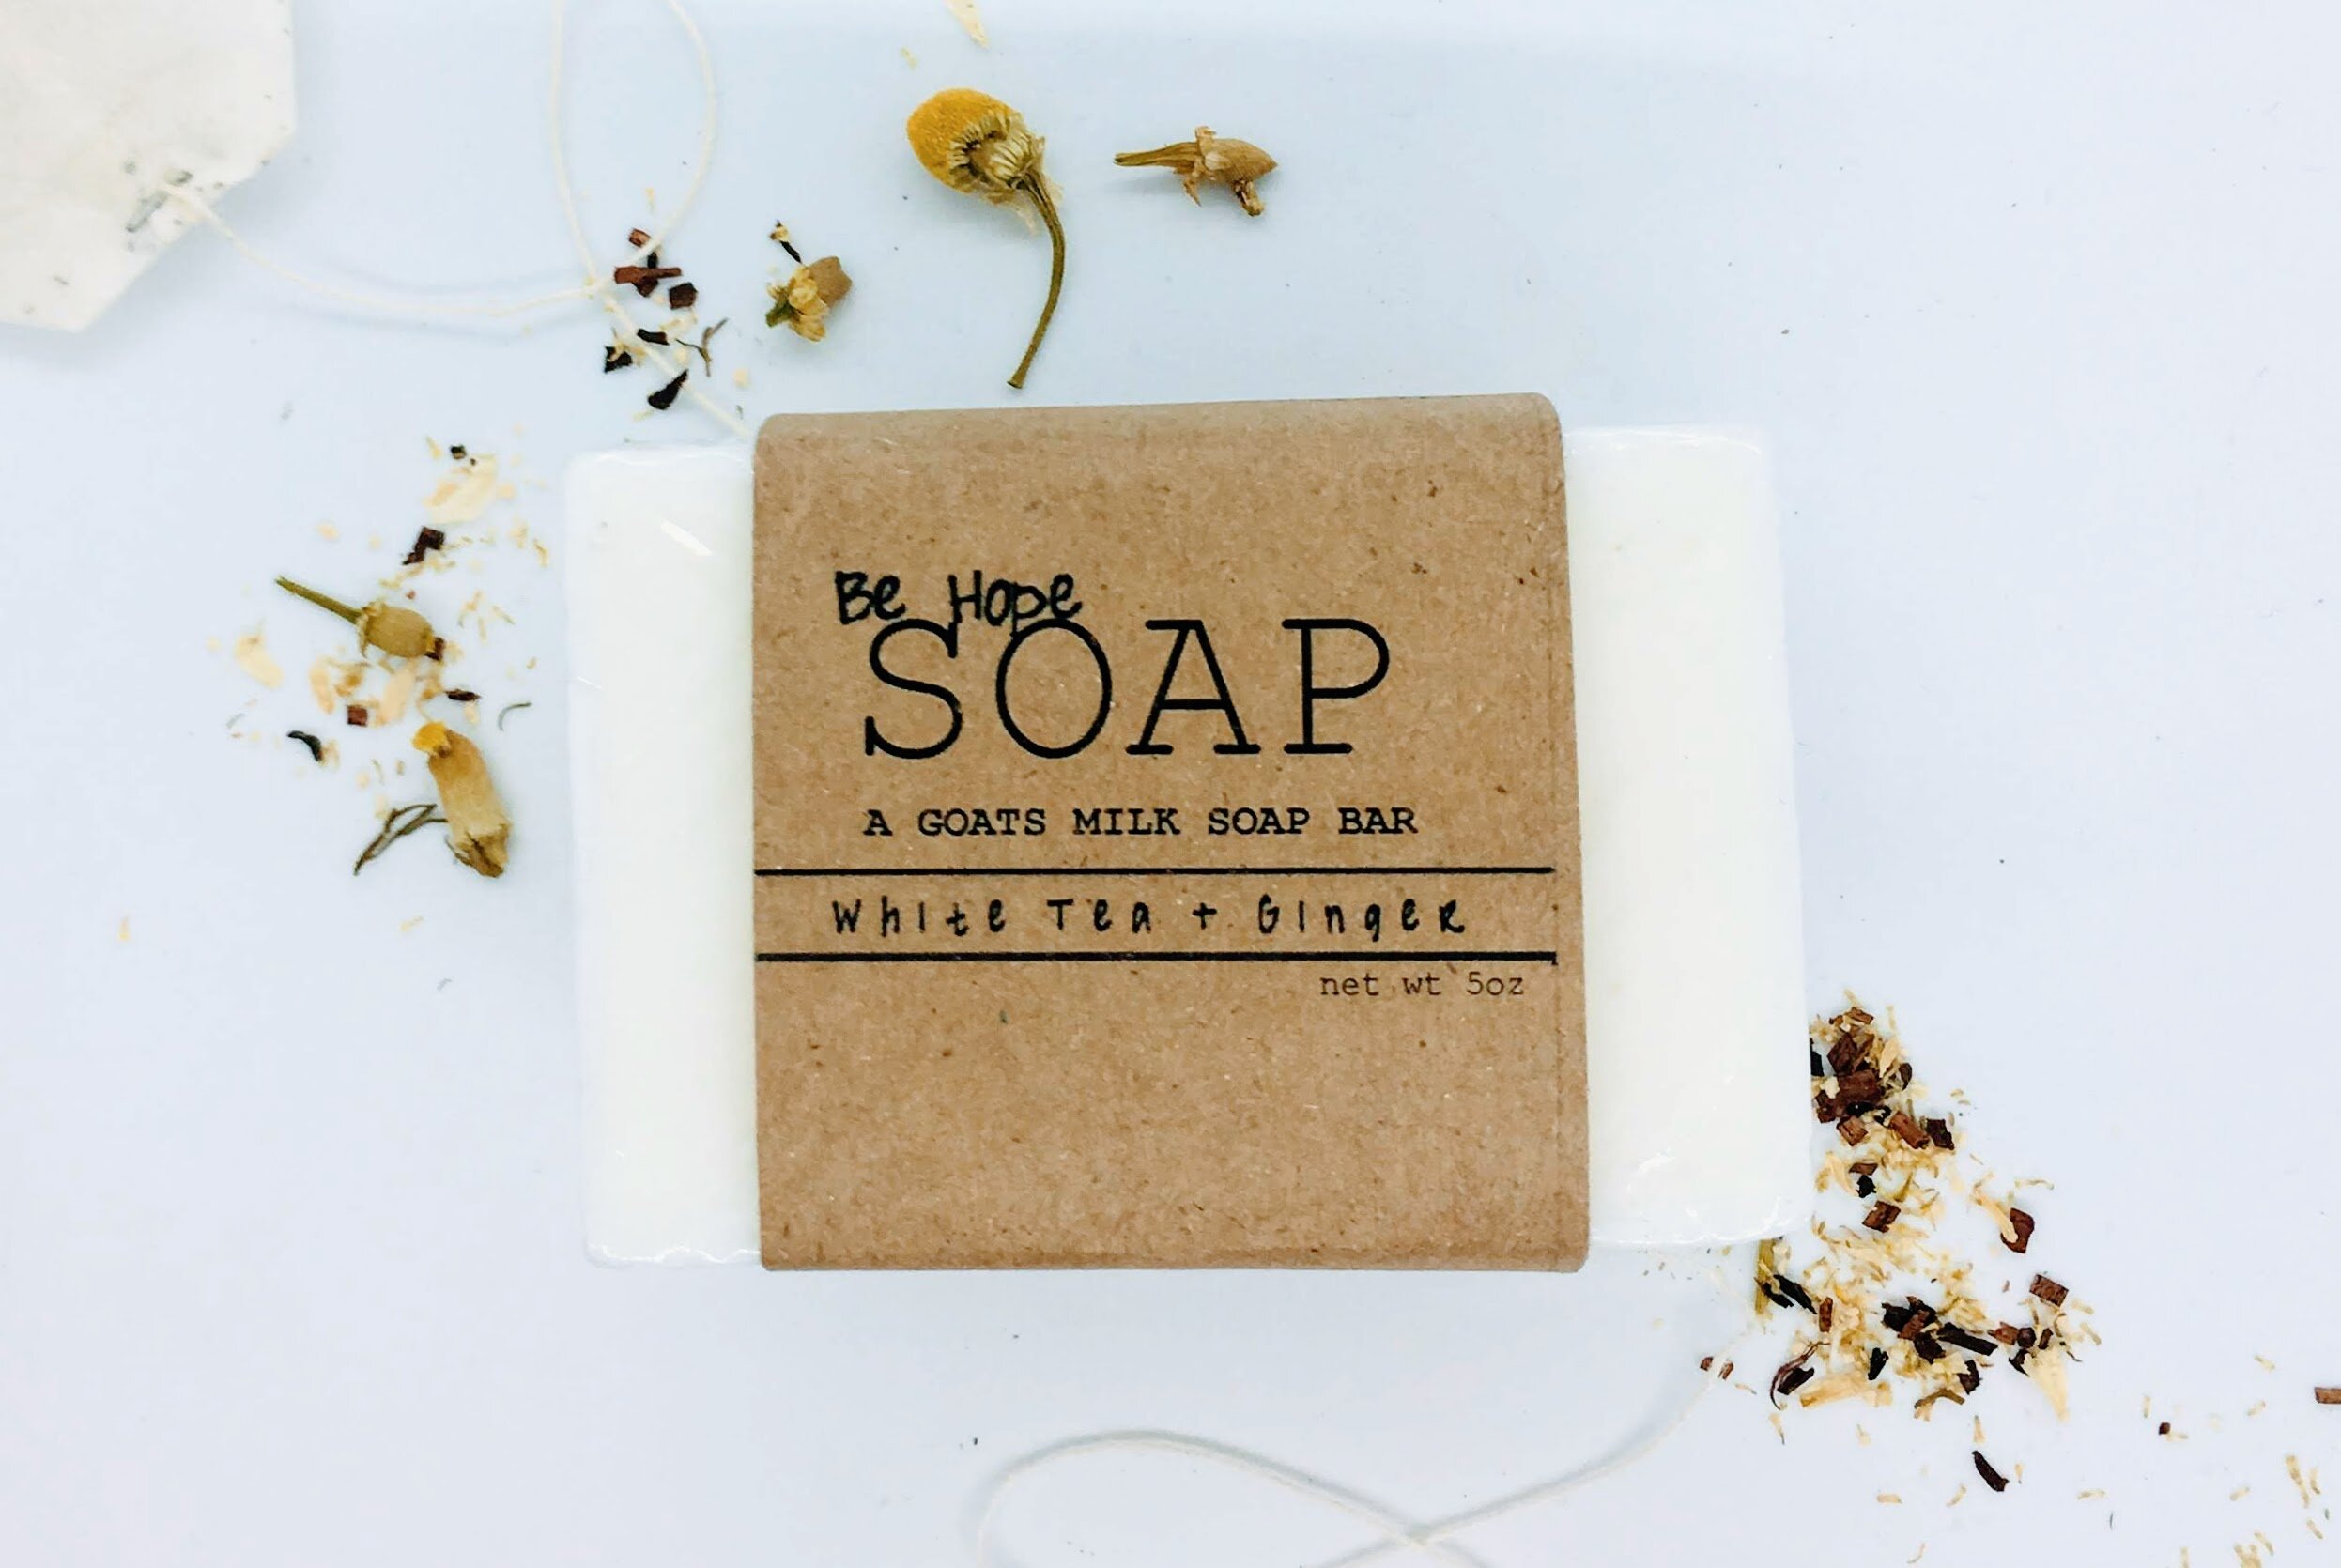 Goat's Milk Soap — Benjamin's Hope  Where People of All Abilities Live,  Learn, Play and Worship.